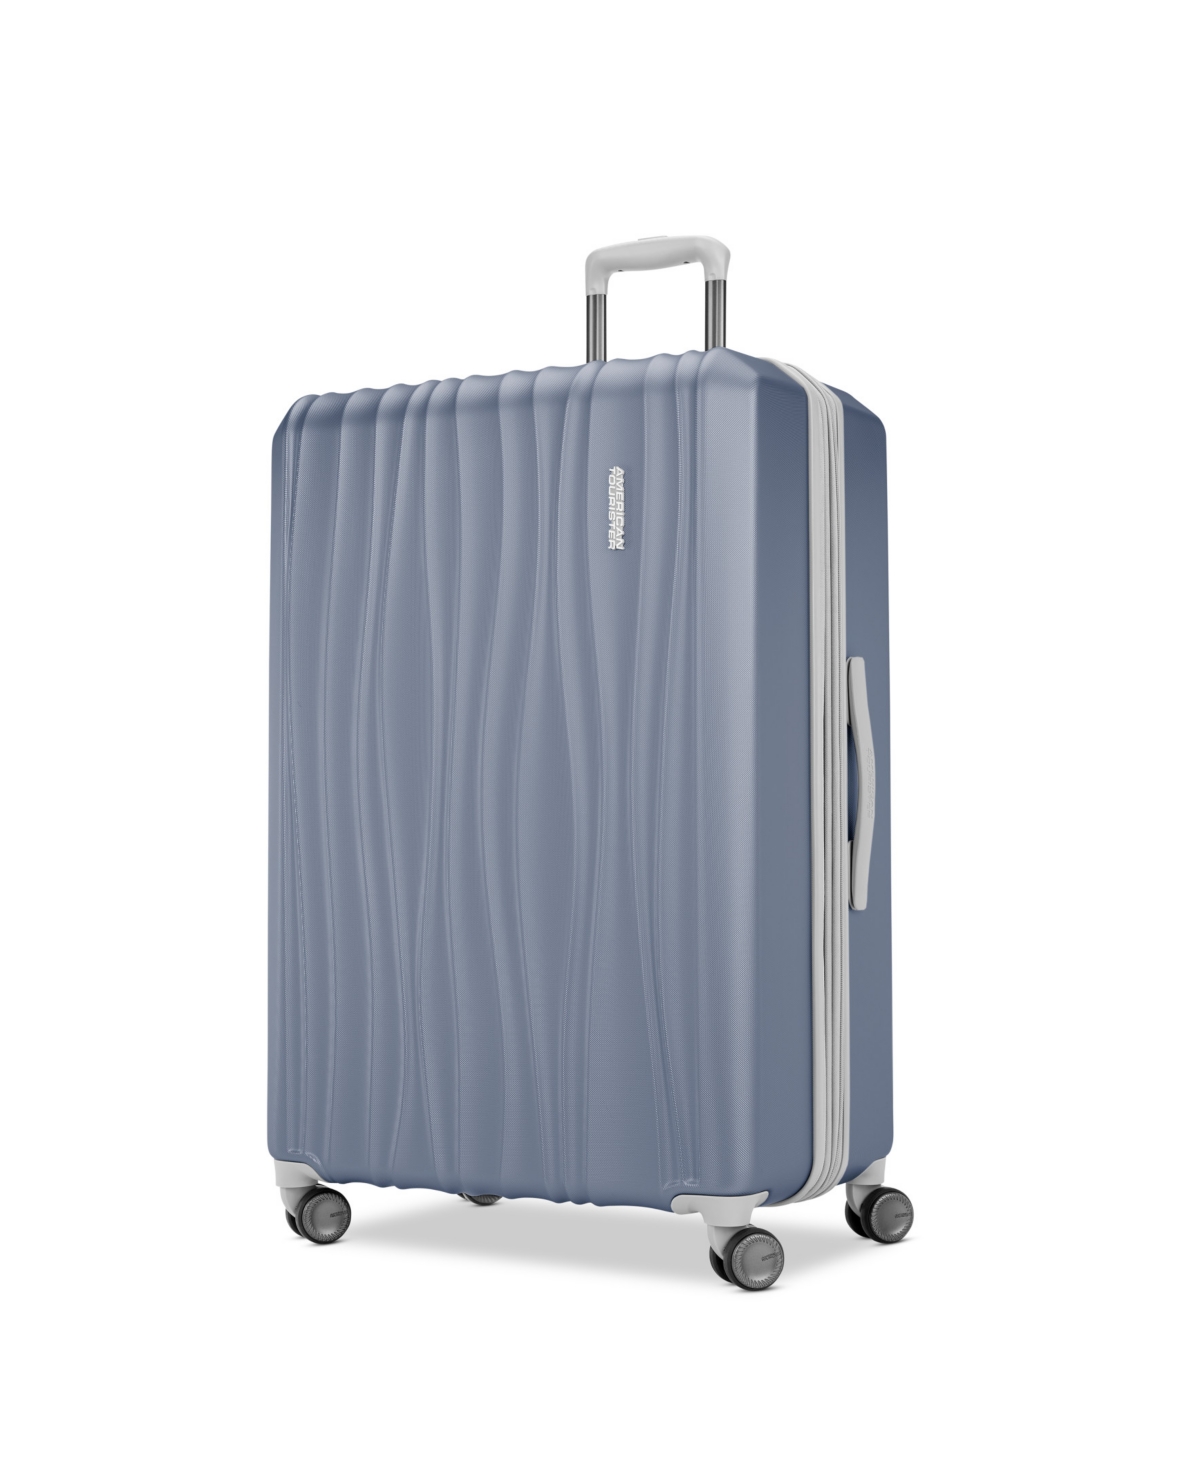 American Tourister Tribute Encore Hardside Check-in 28" Spinner Luggage In Slate Blue